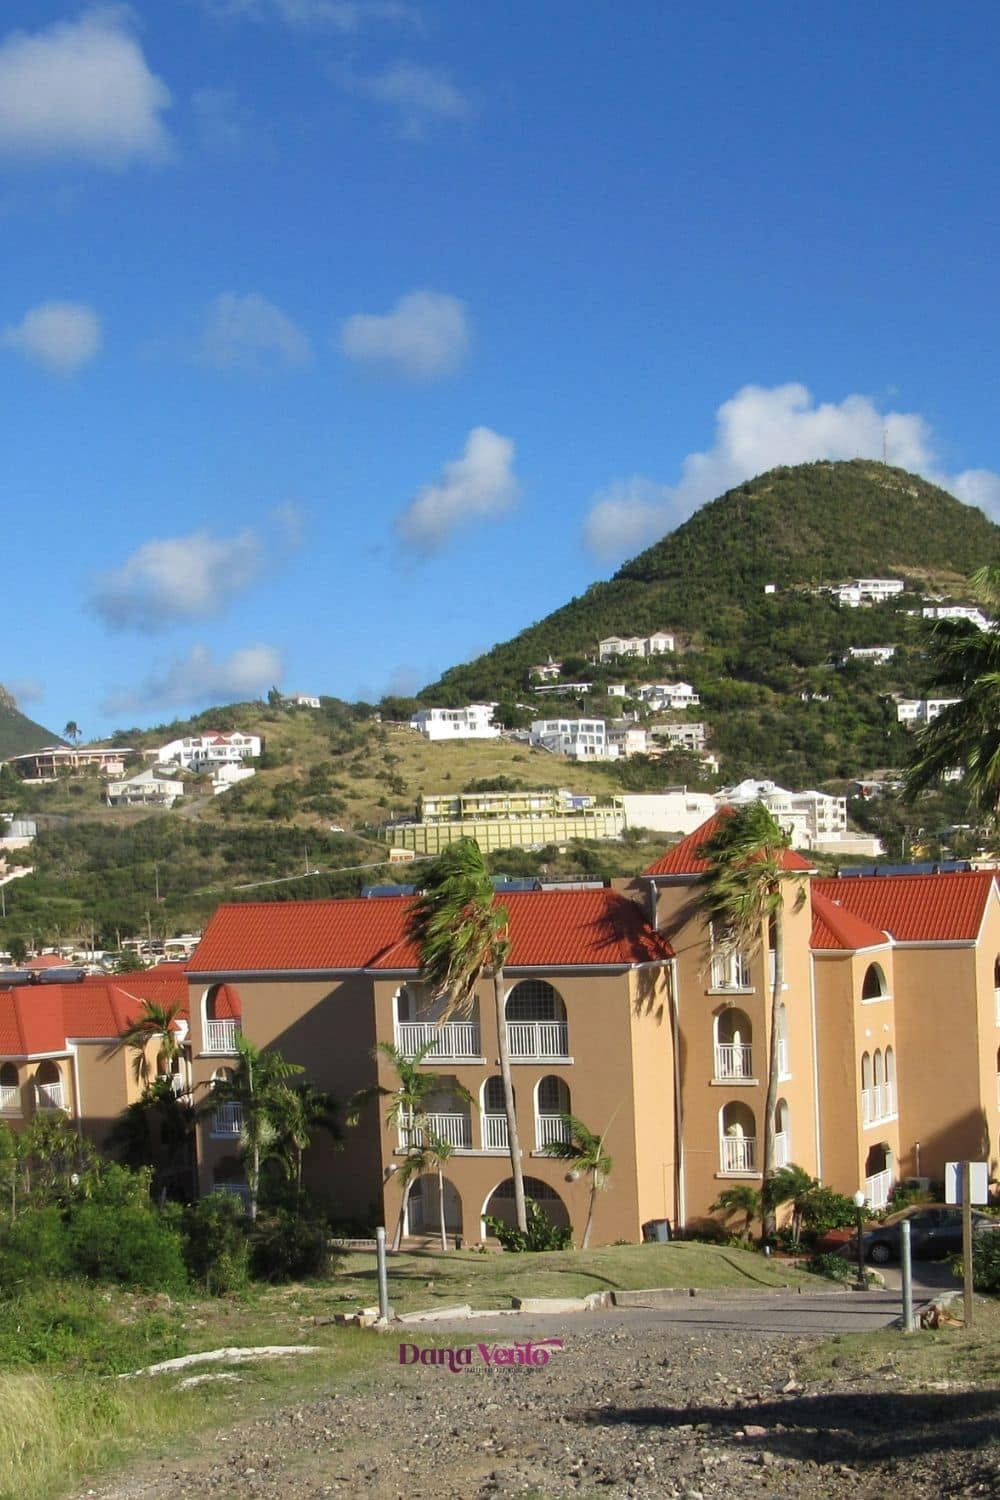 St Maarten resort and its beaches literally are the peninsula